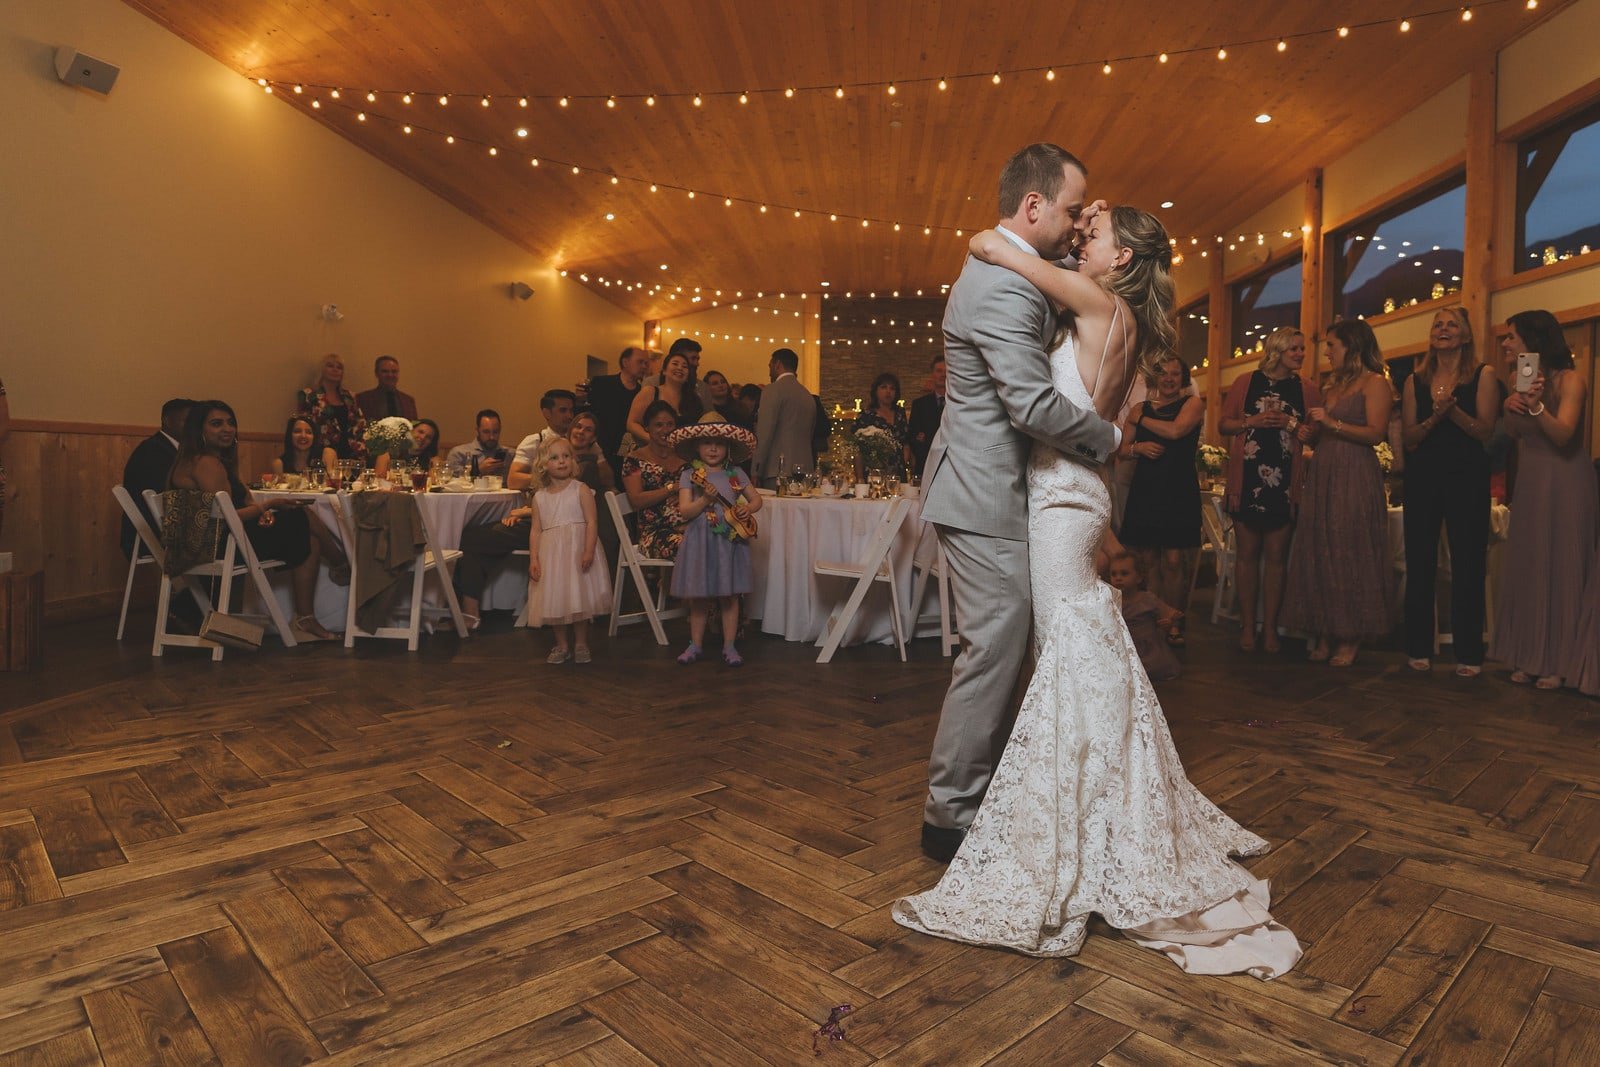 Ken Cheng Photography - First Dance As A Married Couple